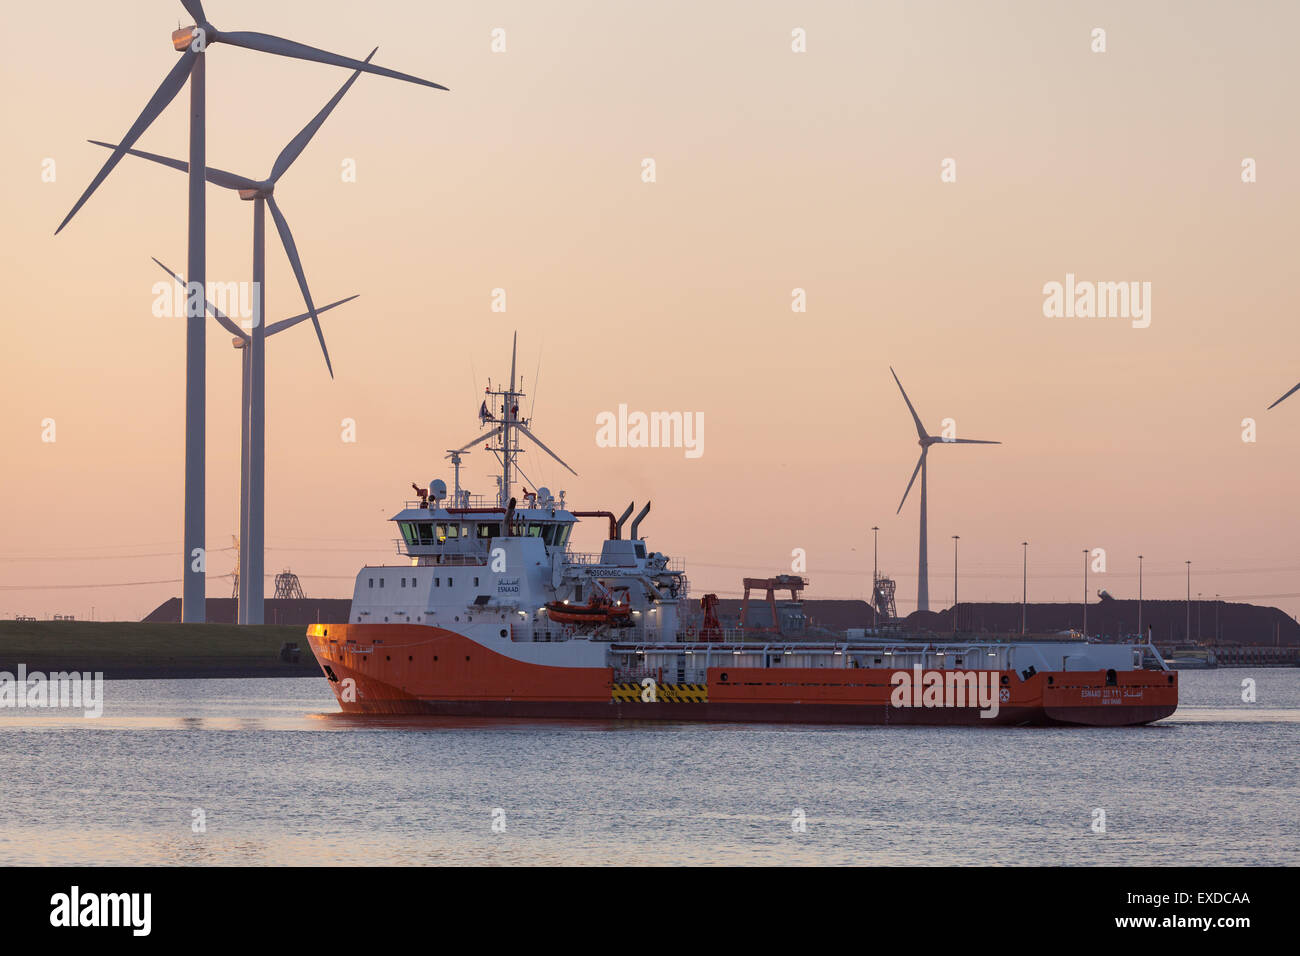 The offshore support vessel, Esnaad, in the port of Eemshaven at sunrise Stock Photo